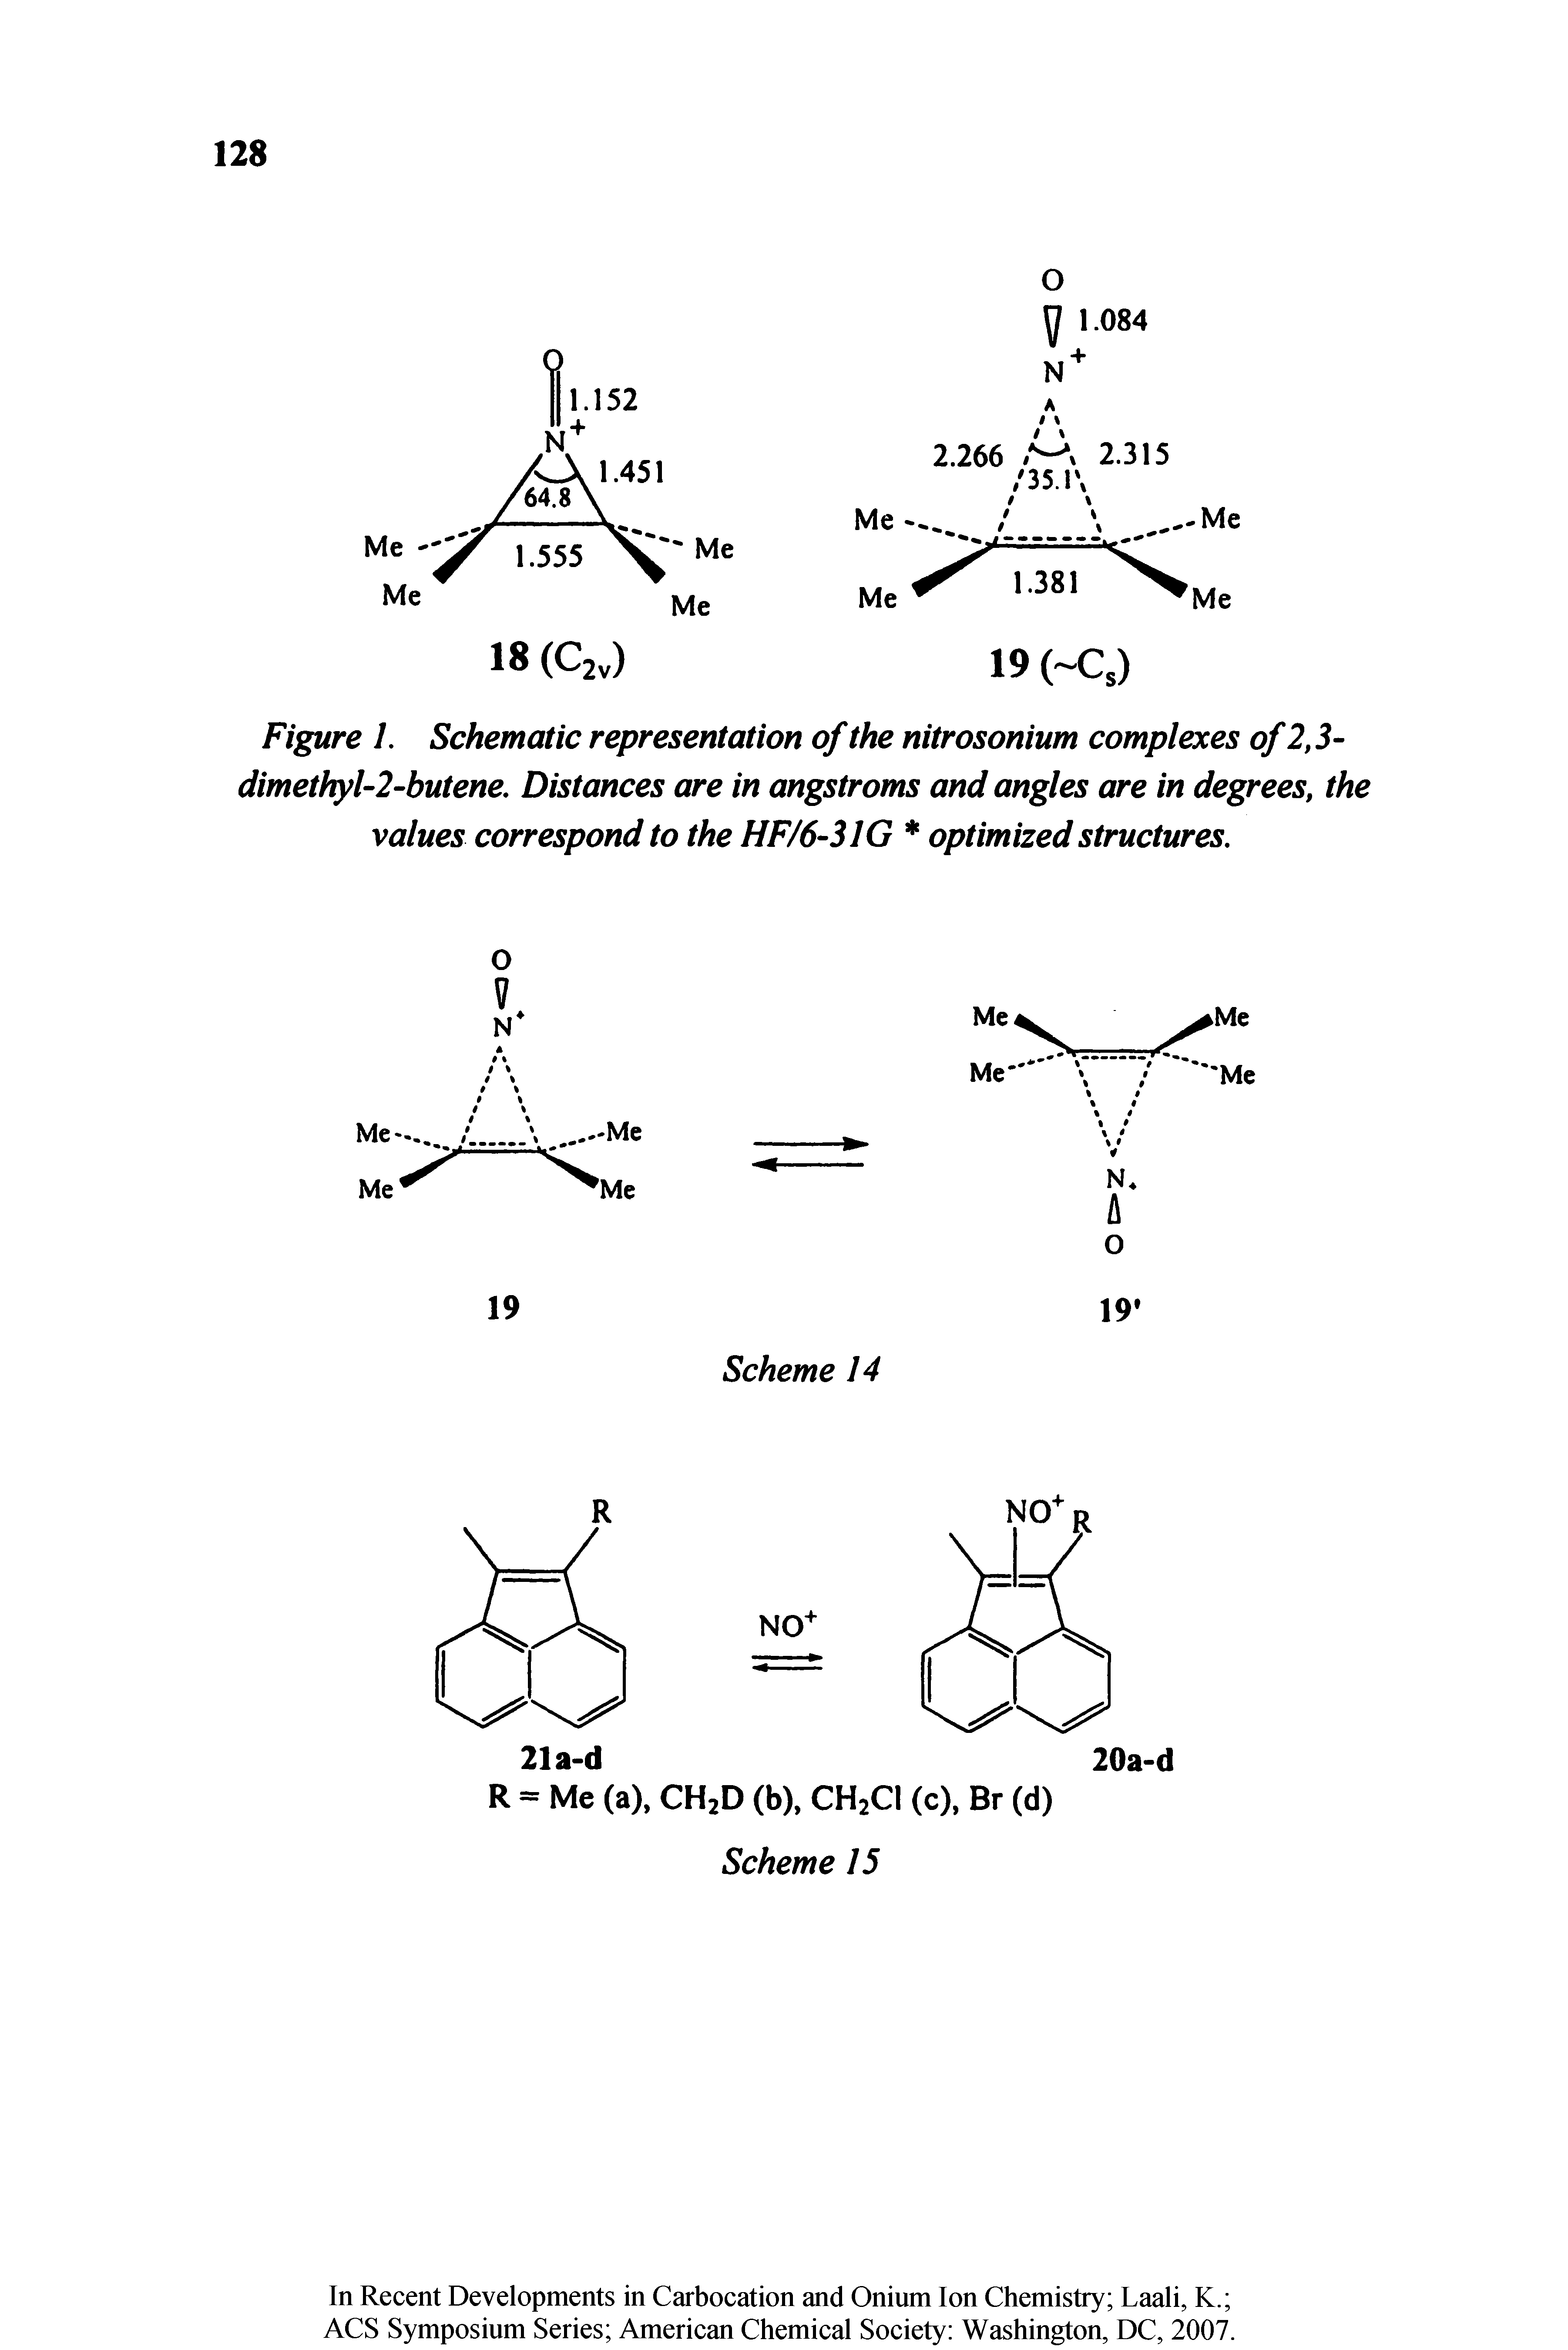 Figure 1. Schematic representation of the nitrosonium complexes of 2,3-dimethyl-2-butene. Distances are in angstroms and angles are in degrees, the values correspond to the HF/6-31G optimized structures.